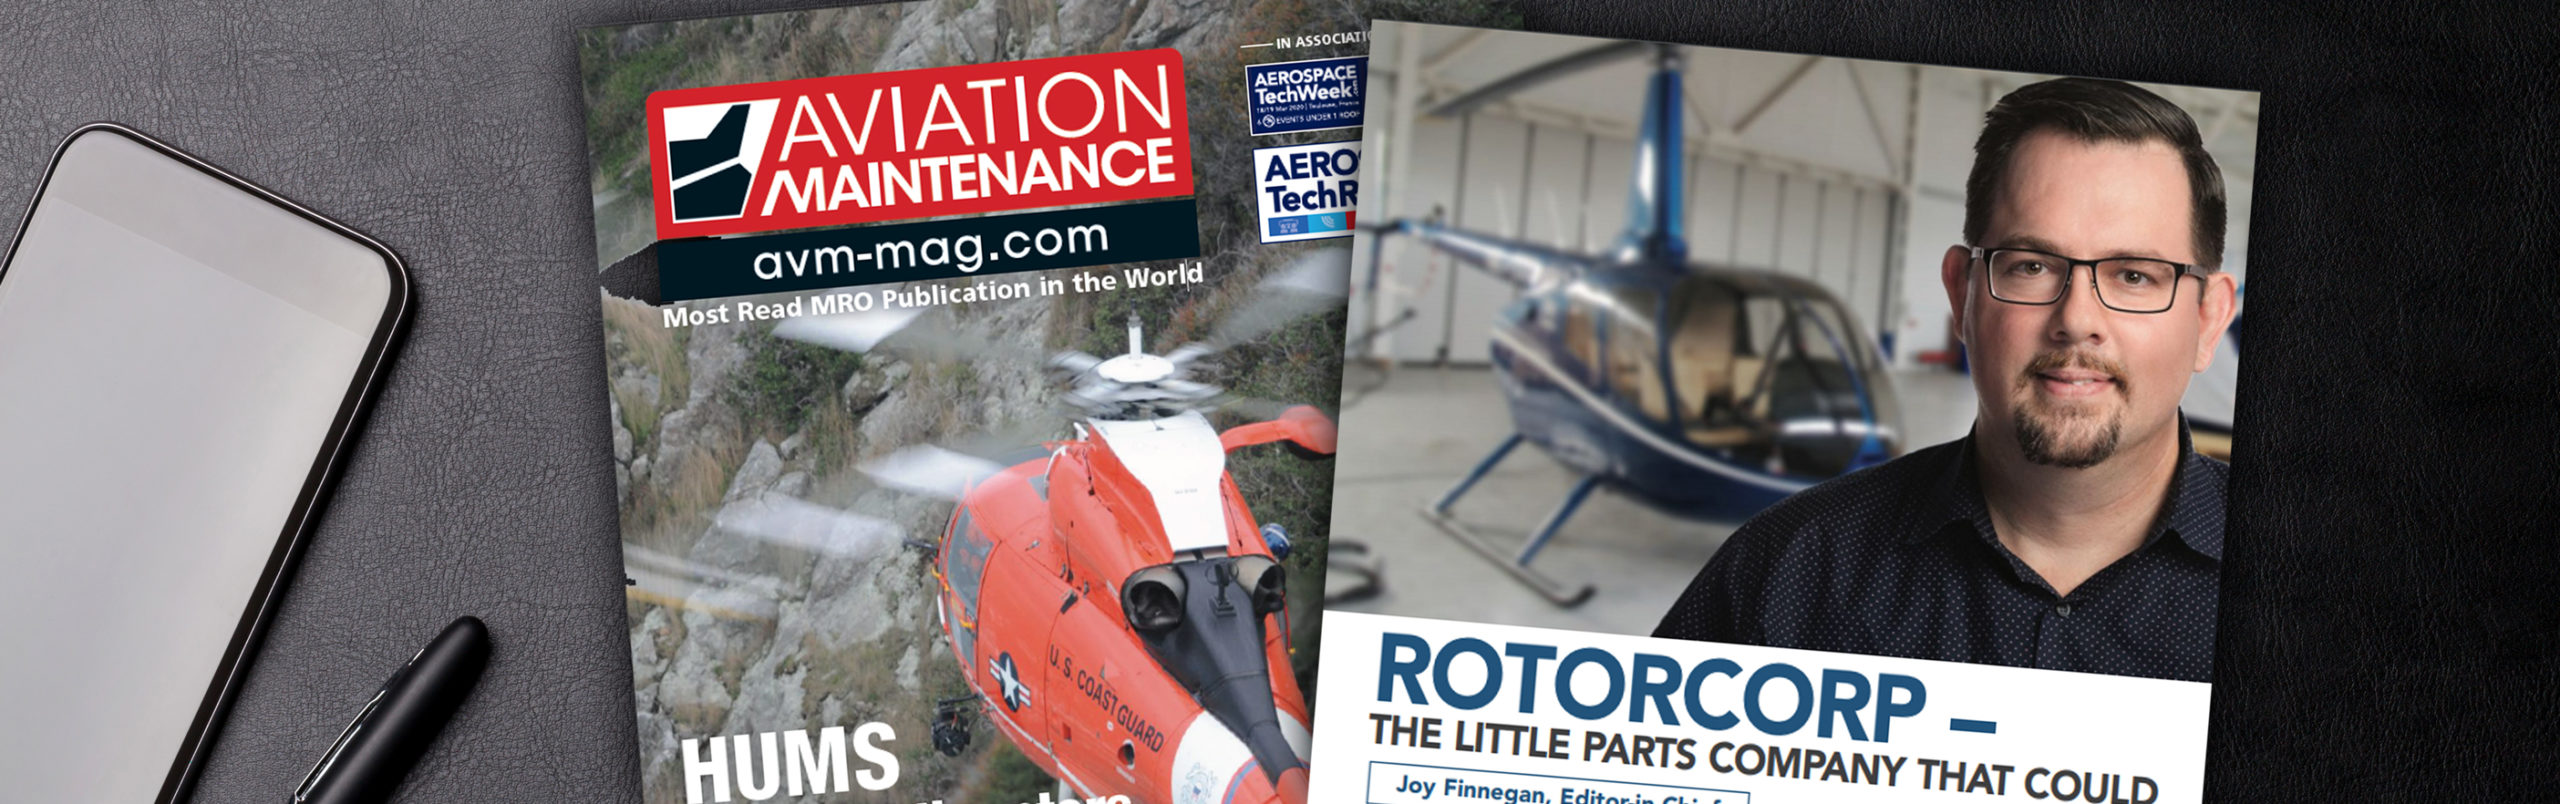 Rotorcorp Featured in January 2020 Issue of Aviation Maintenance Magazine